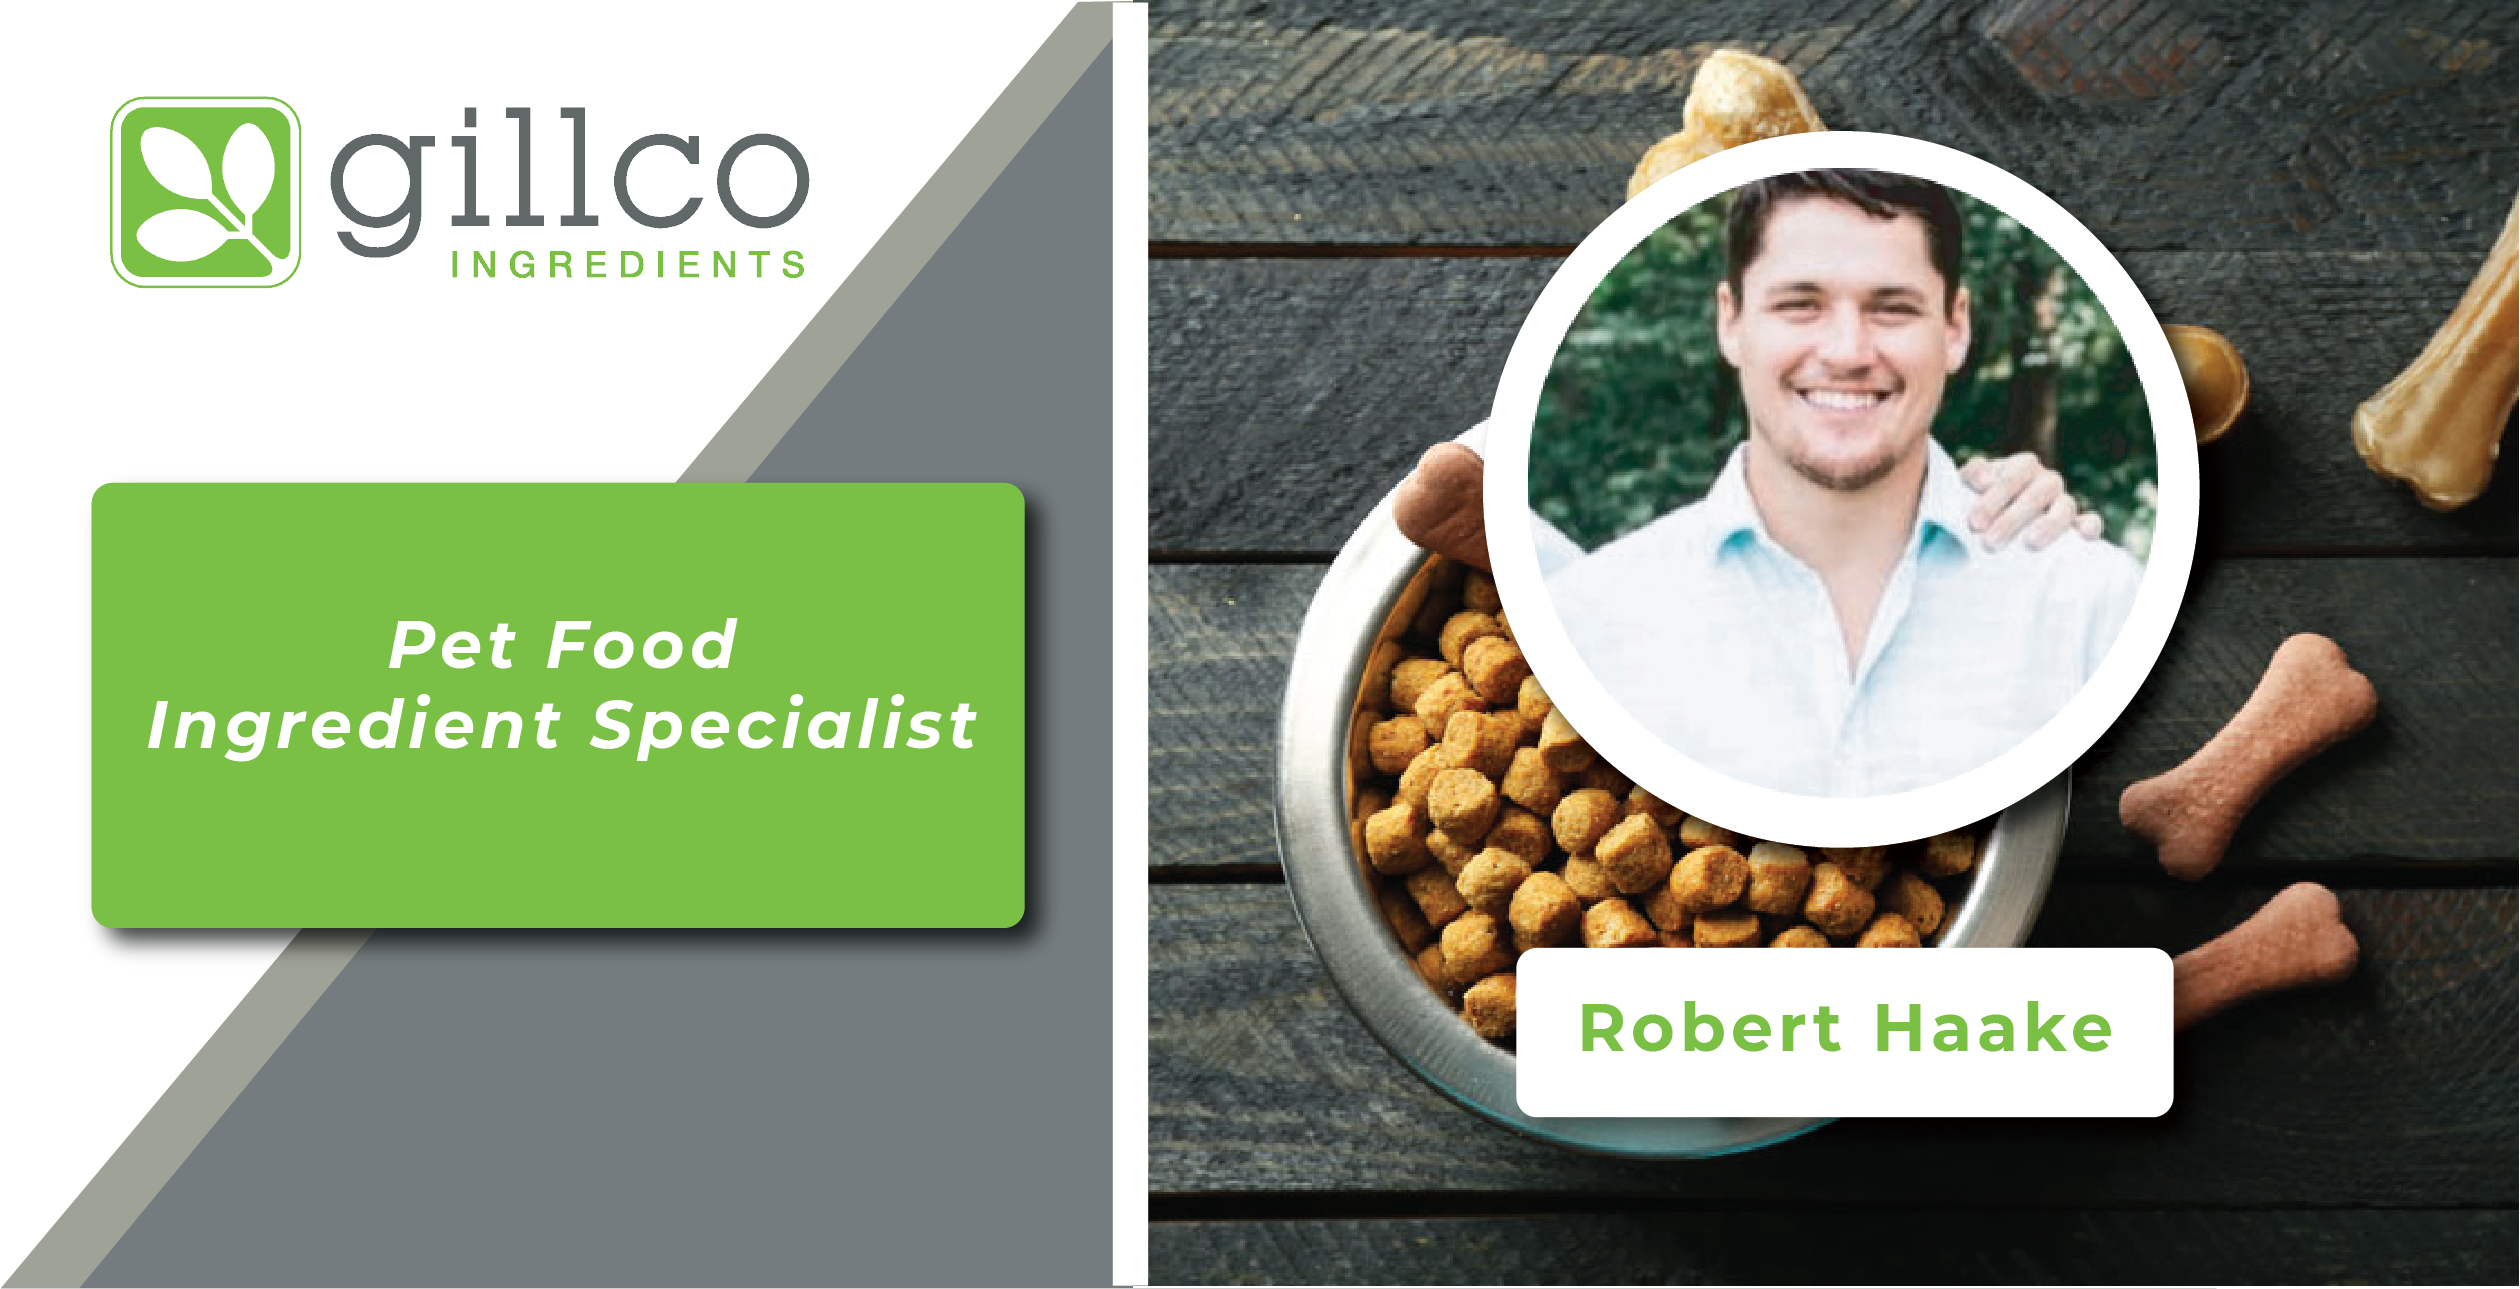 Picture of Robert Haake, Pet Food Specialist for Gillco Ingredients